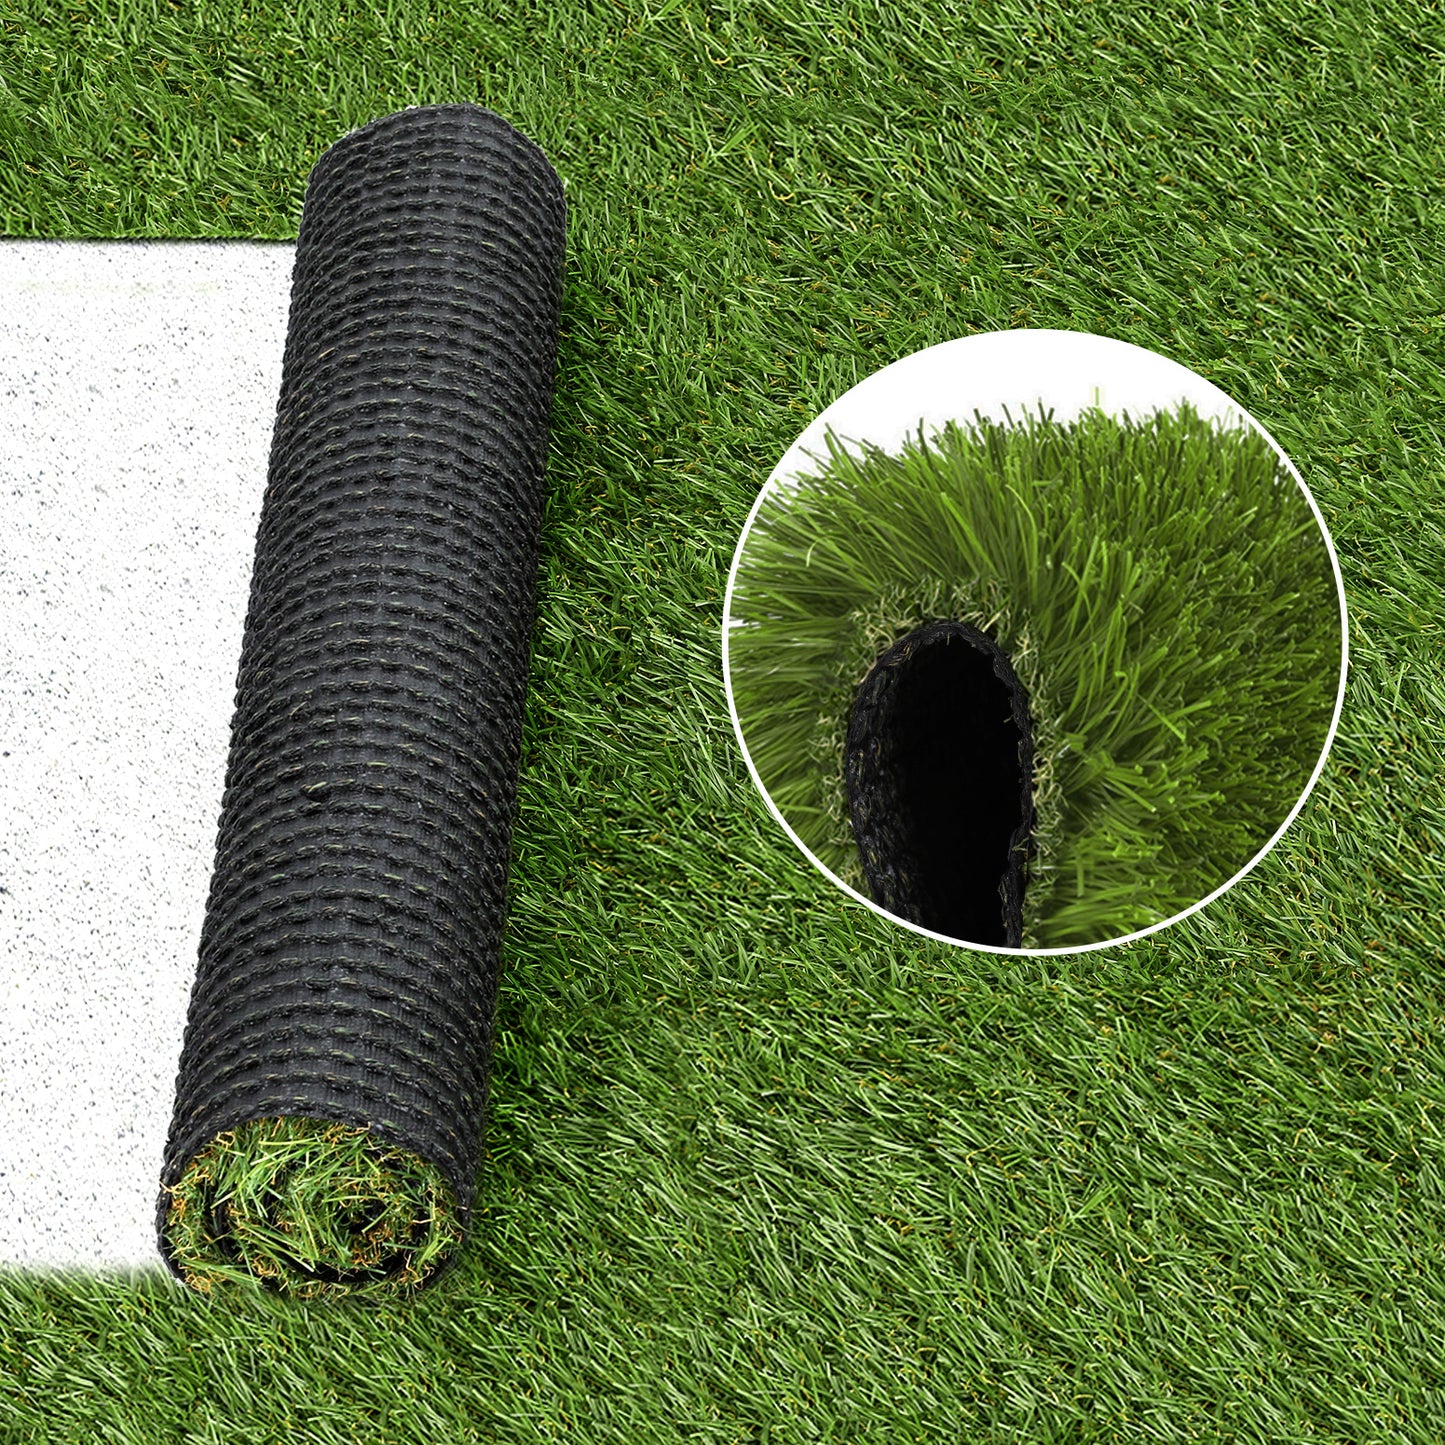 60sqm Artificial Grass 30mm 2mx5m Synthetic Fake Lawn Turf Plastic Plant - 4-Colour Green